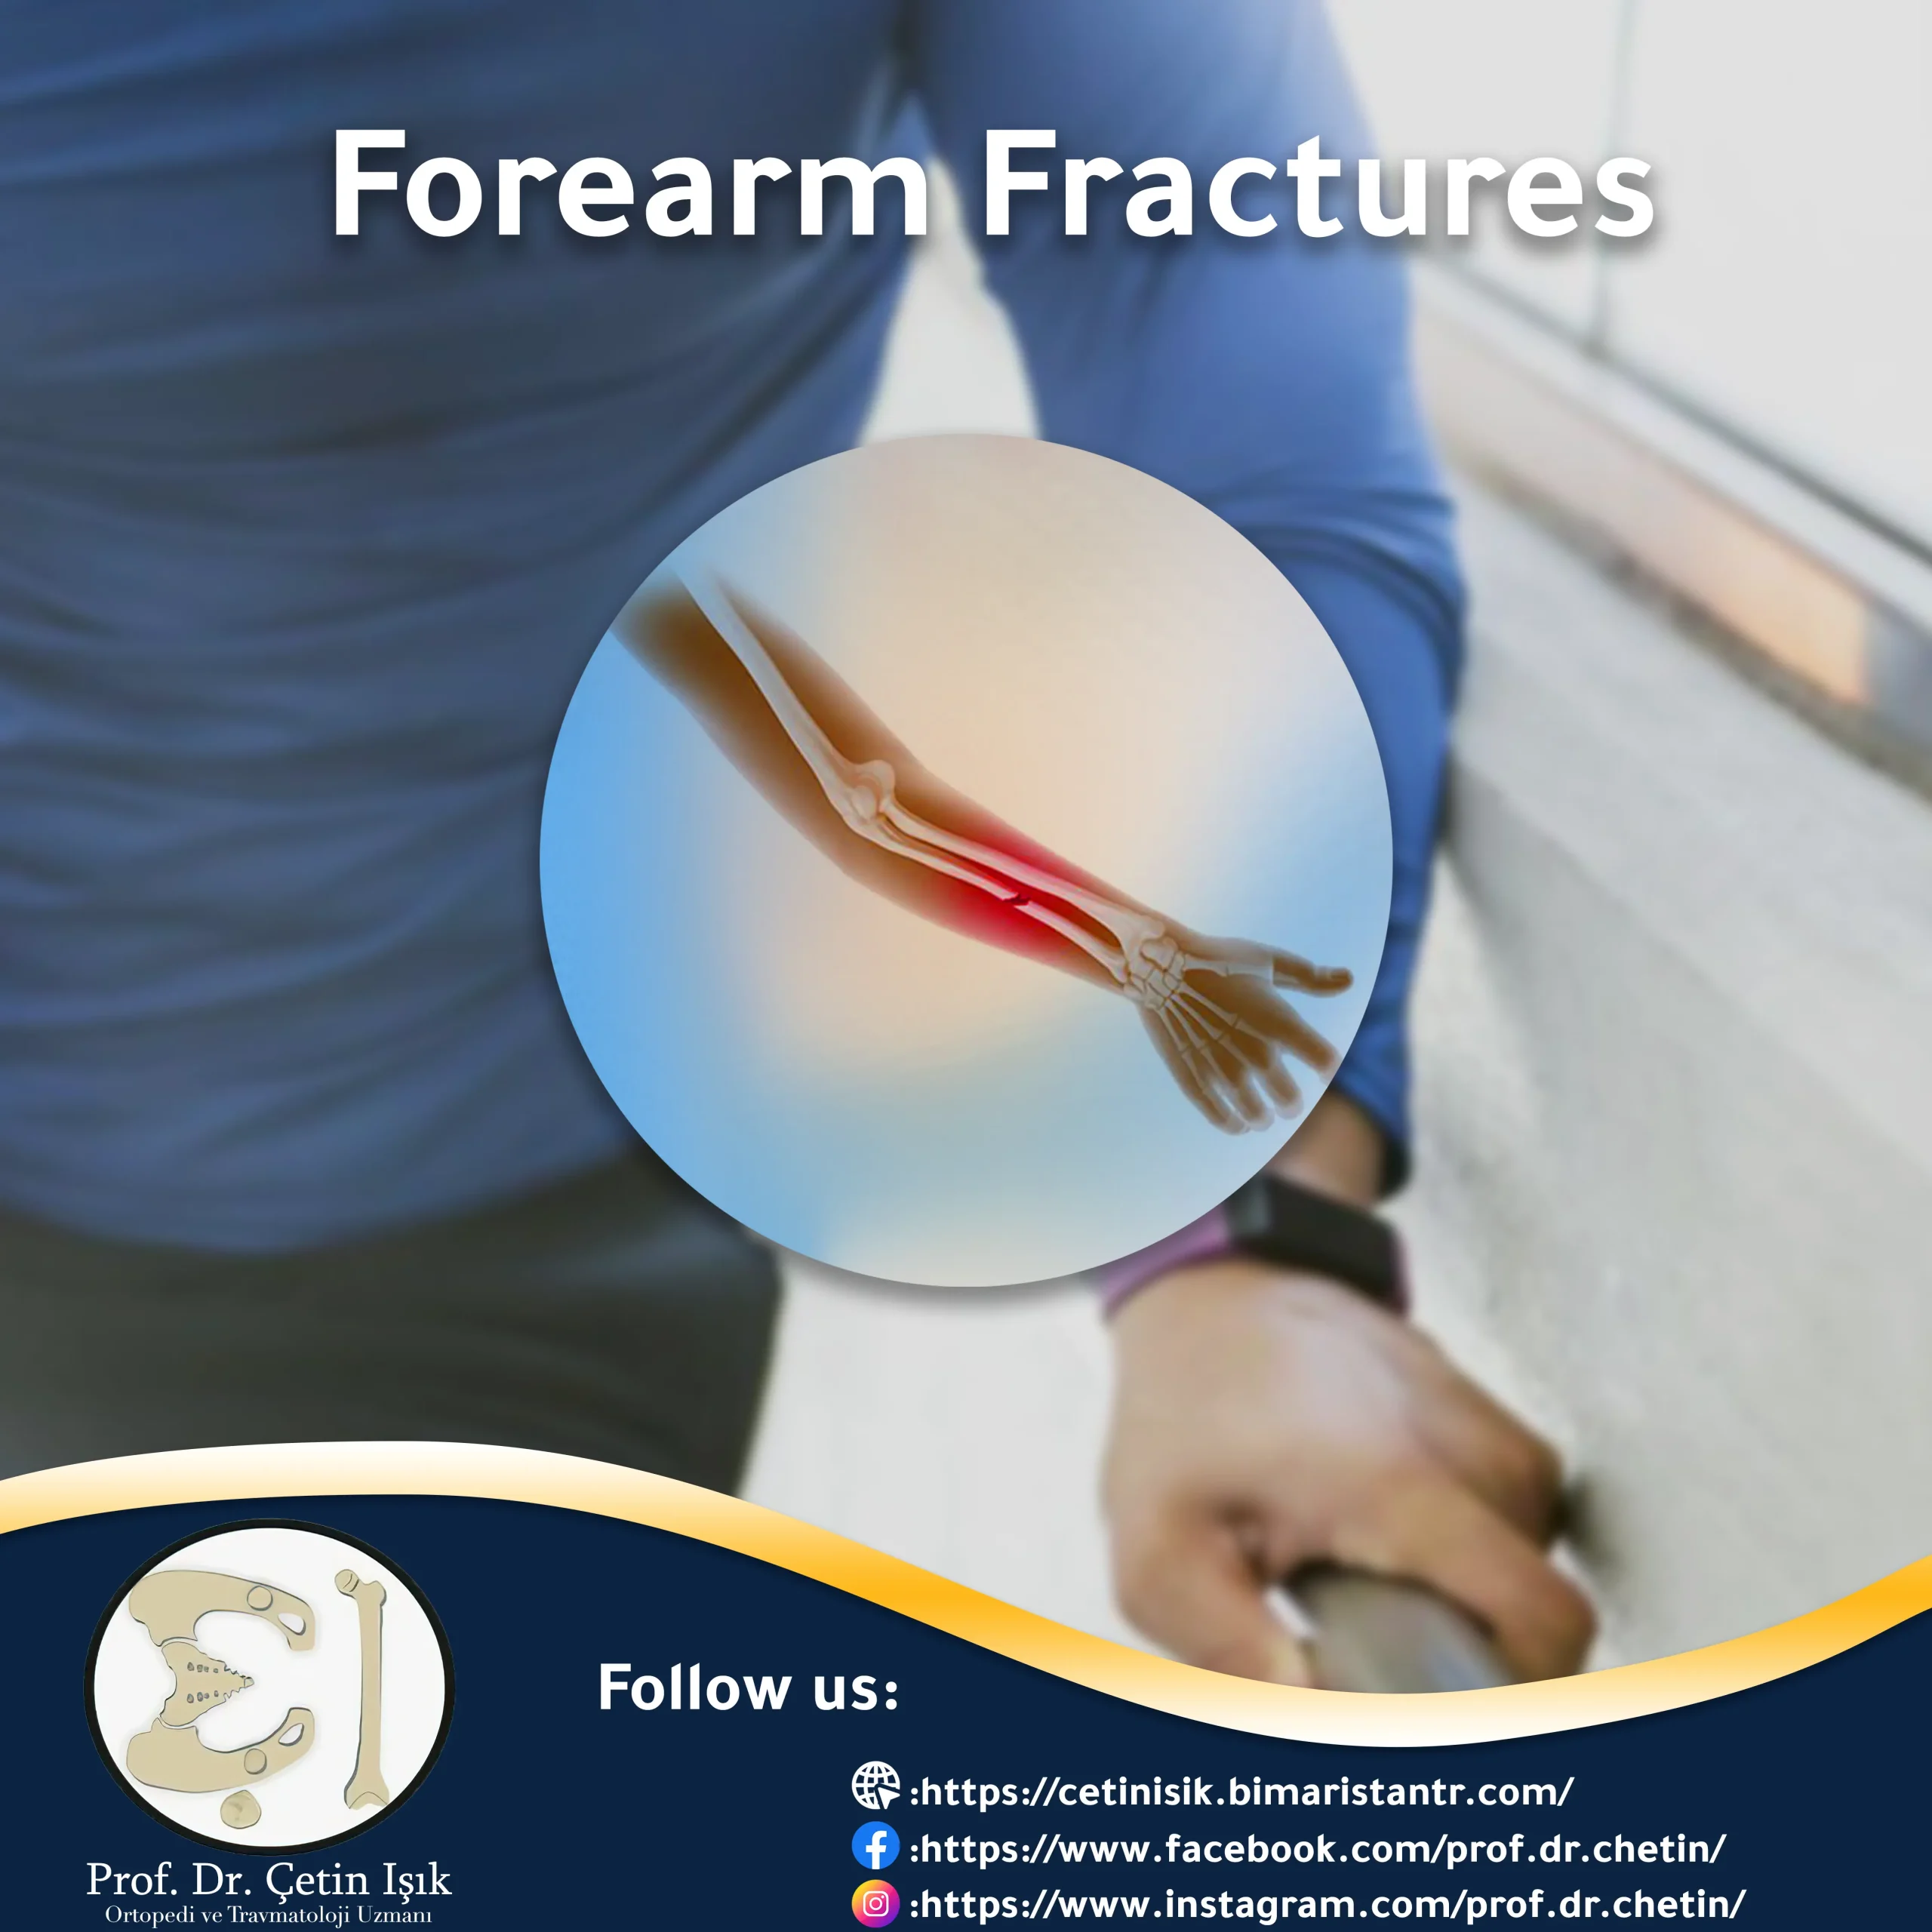 Cover image of the forearm fractures article